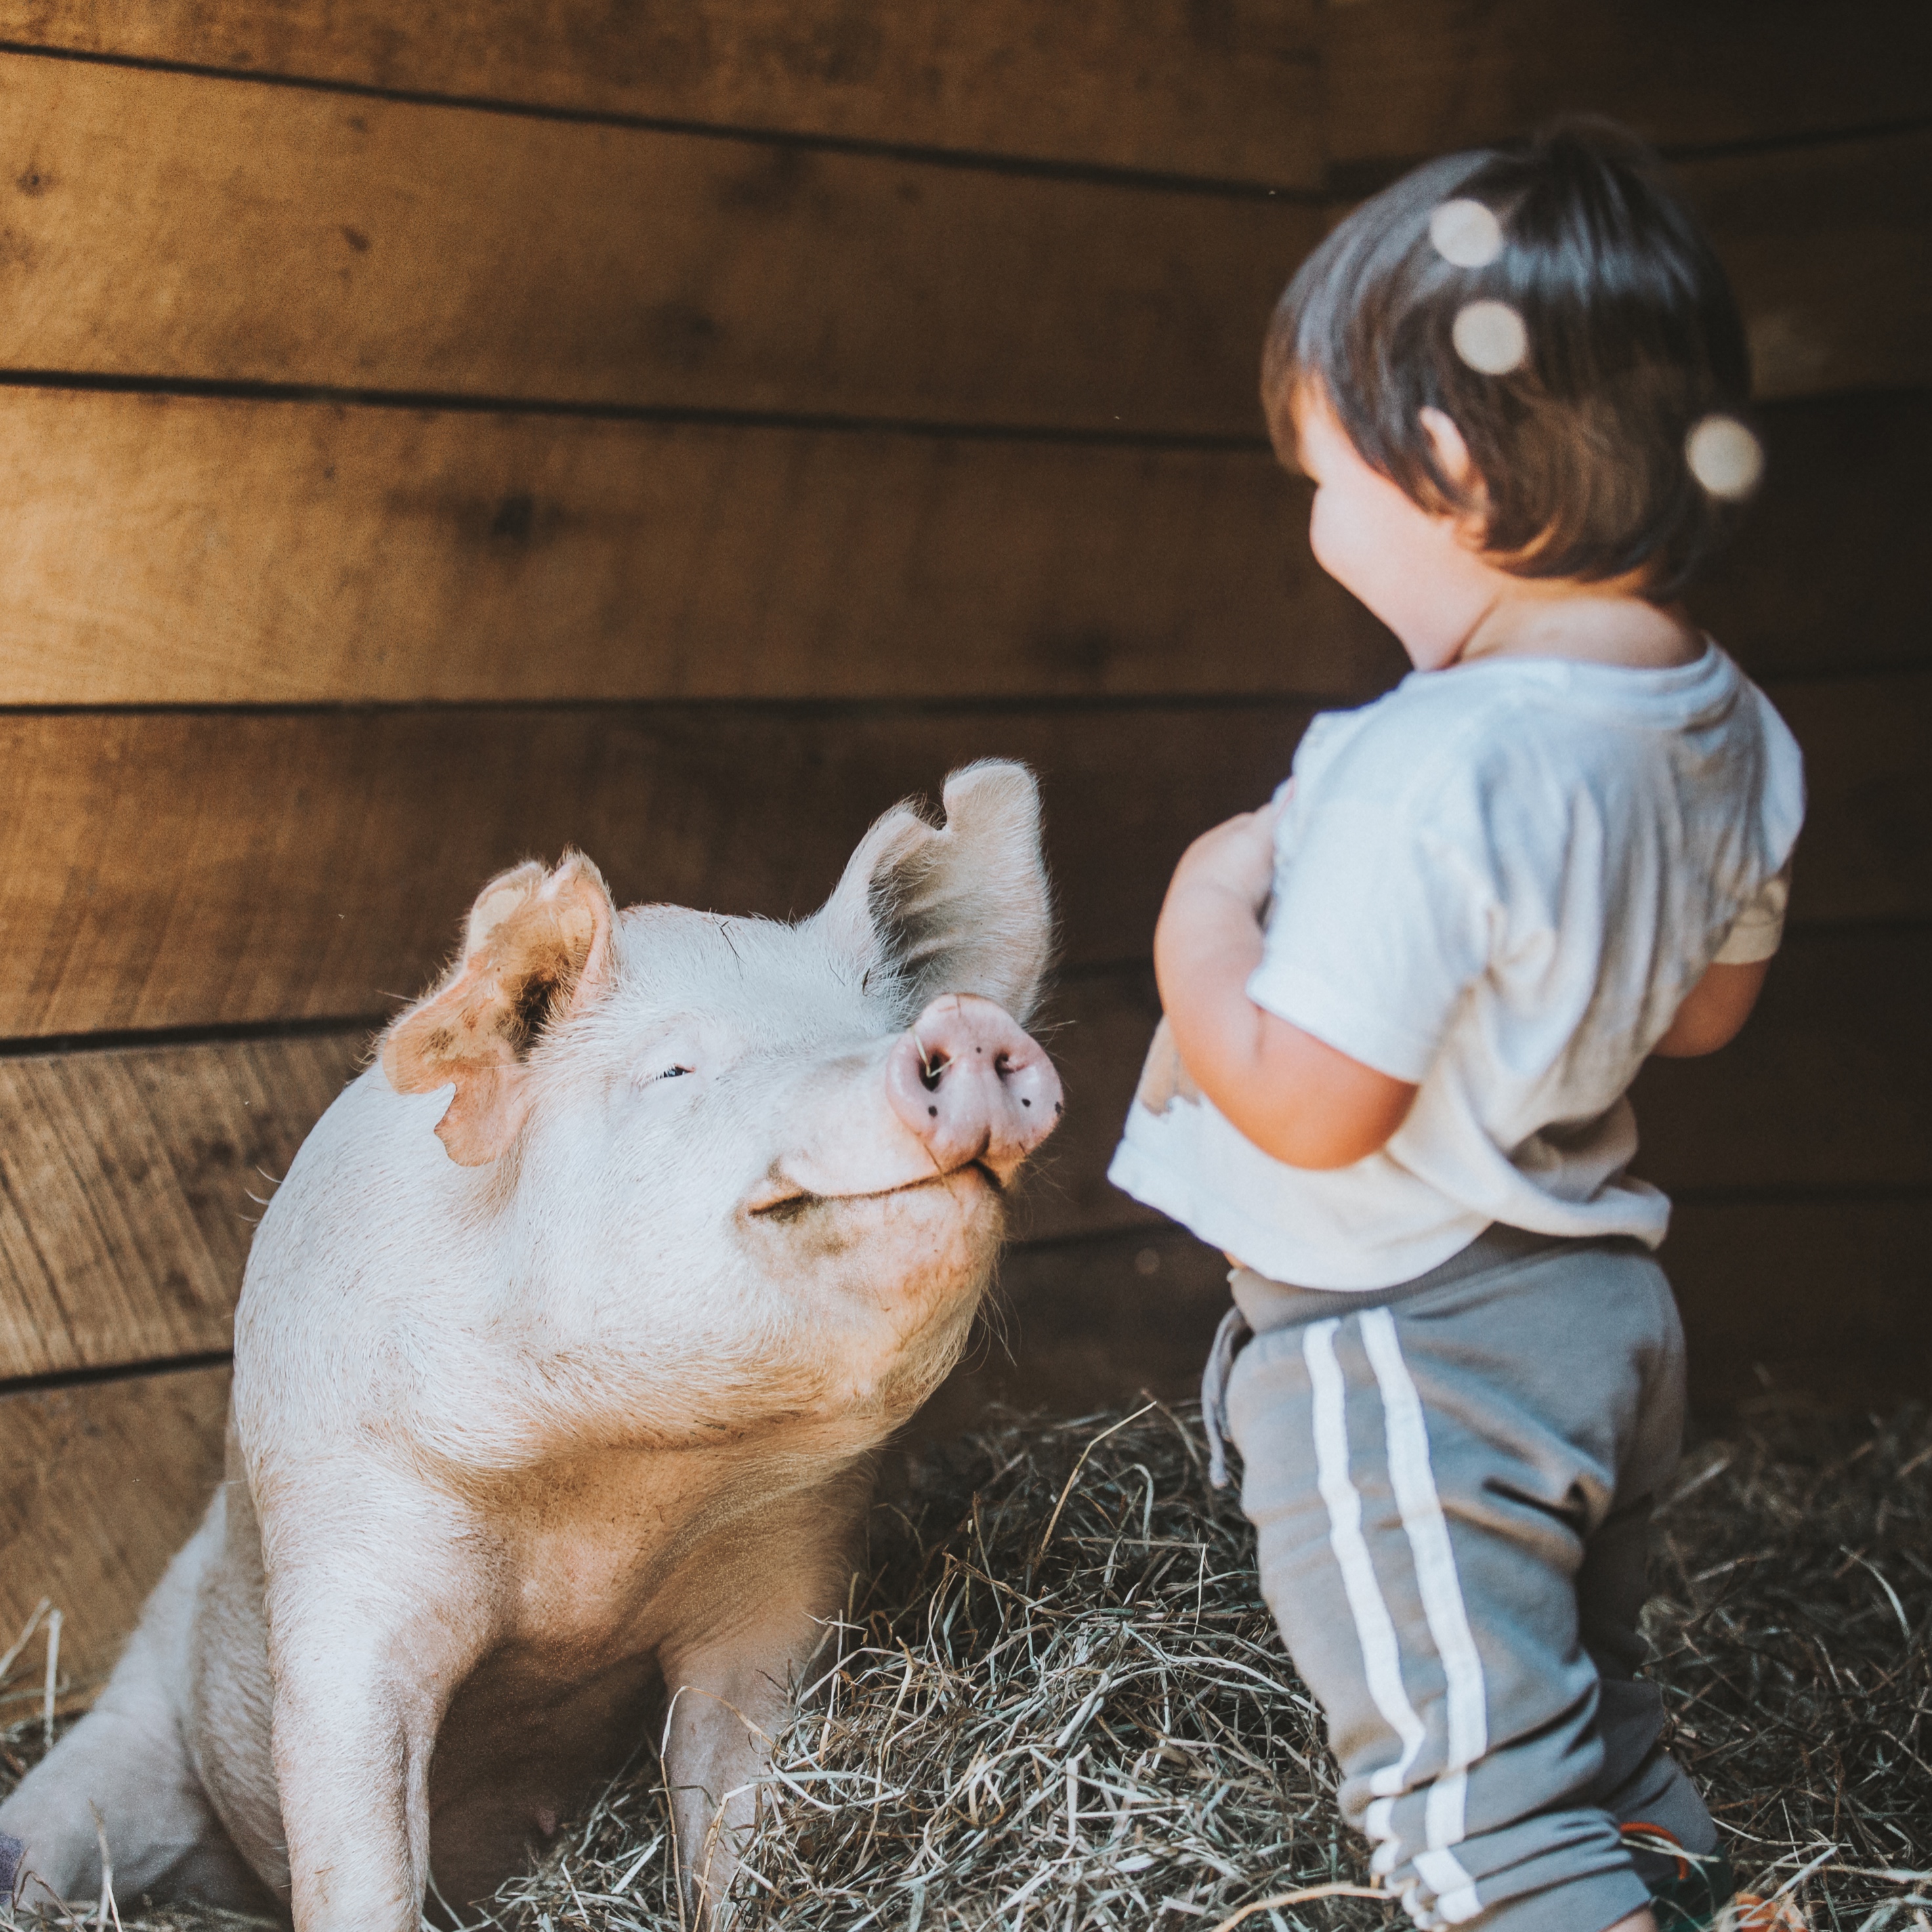 A kid and a pig looking at each other